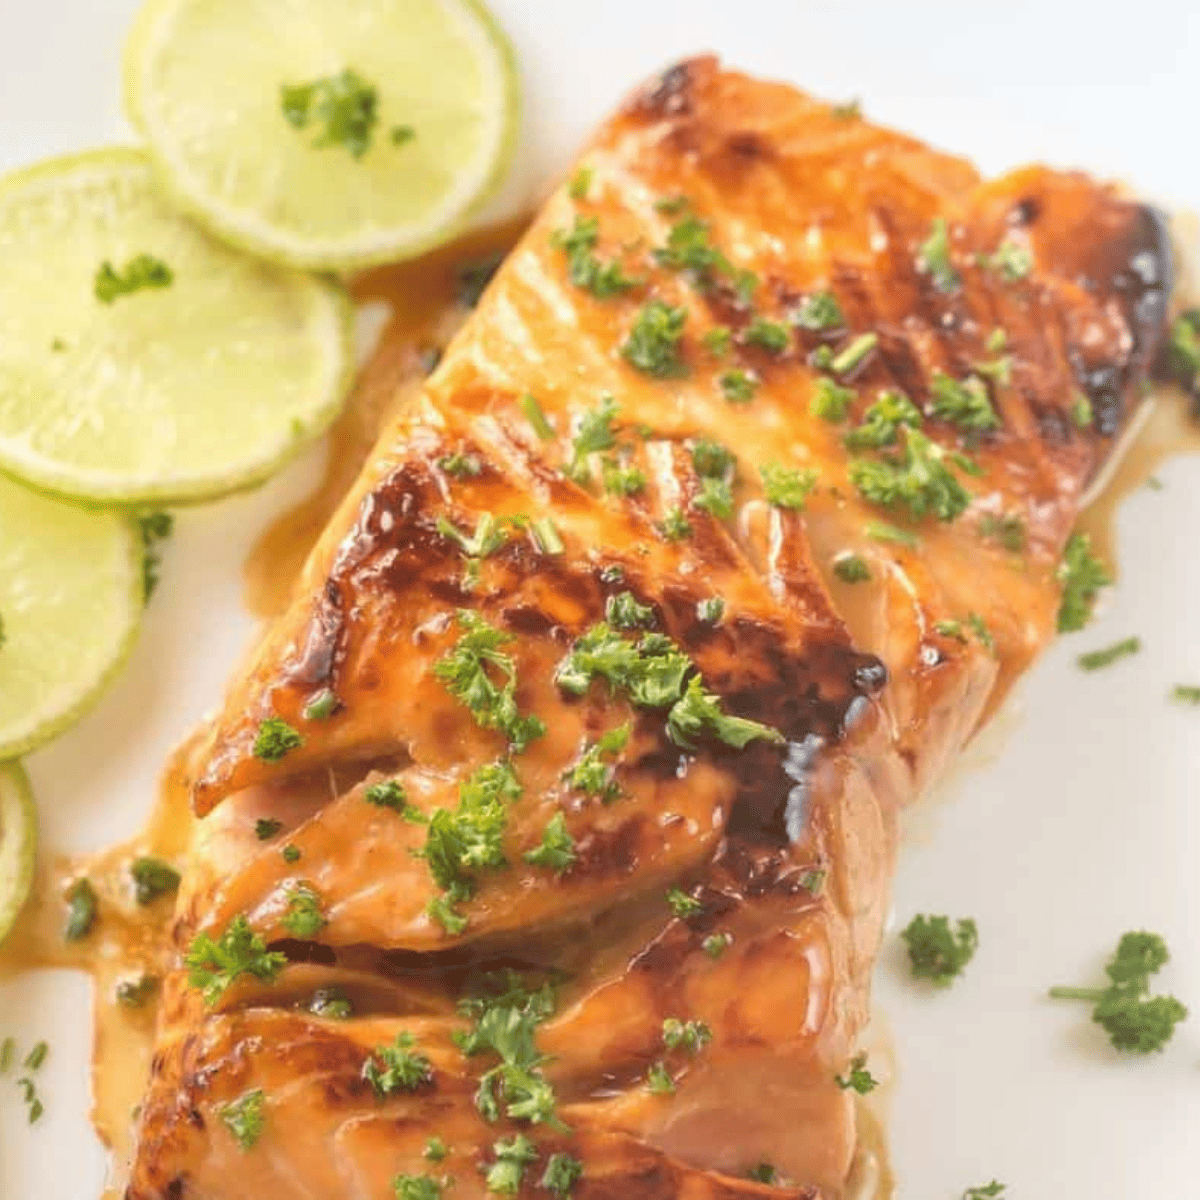 https://forktospoon.com/wp-content/uploads/2021/09/Chile-Lime-Air-Fryer-Salmon.png